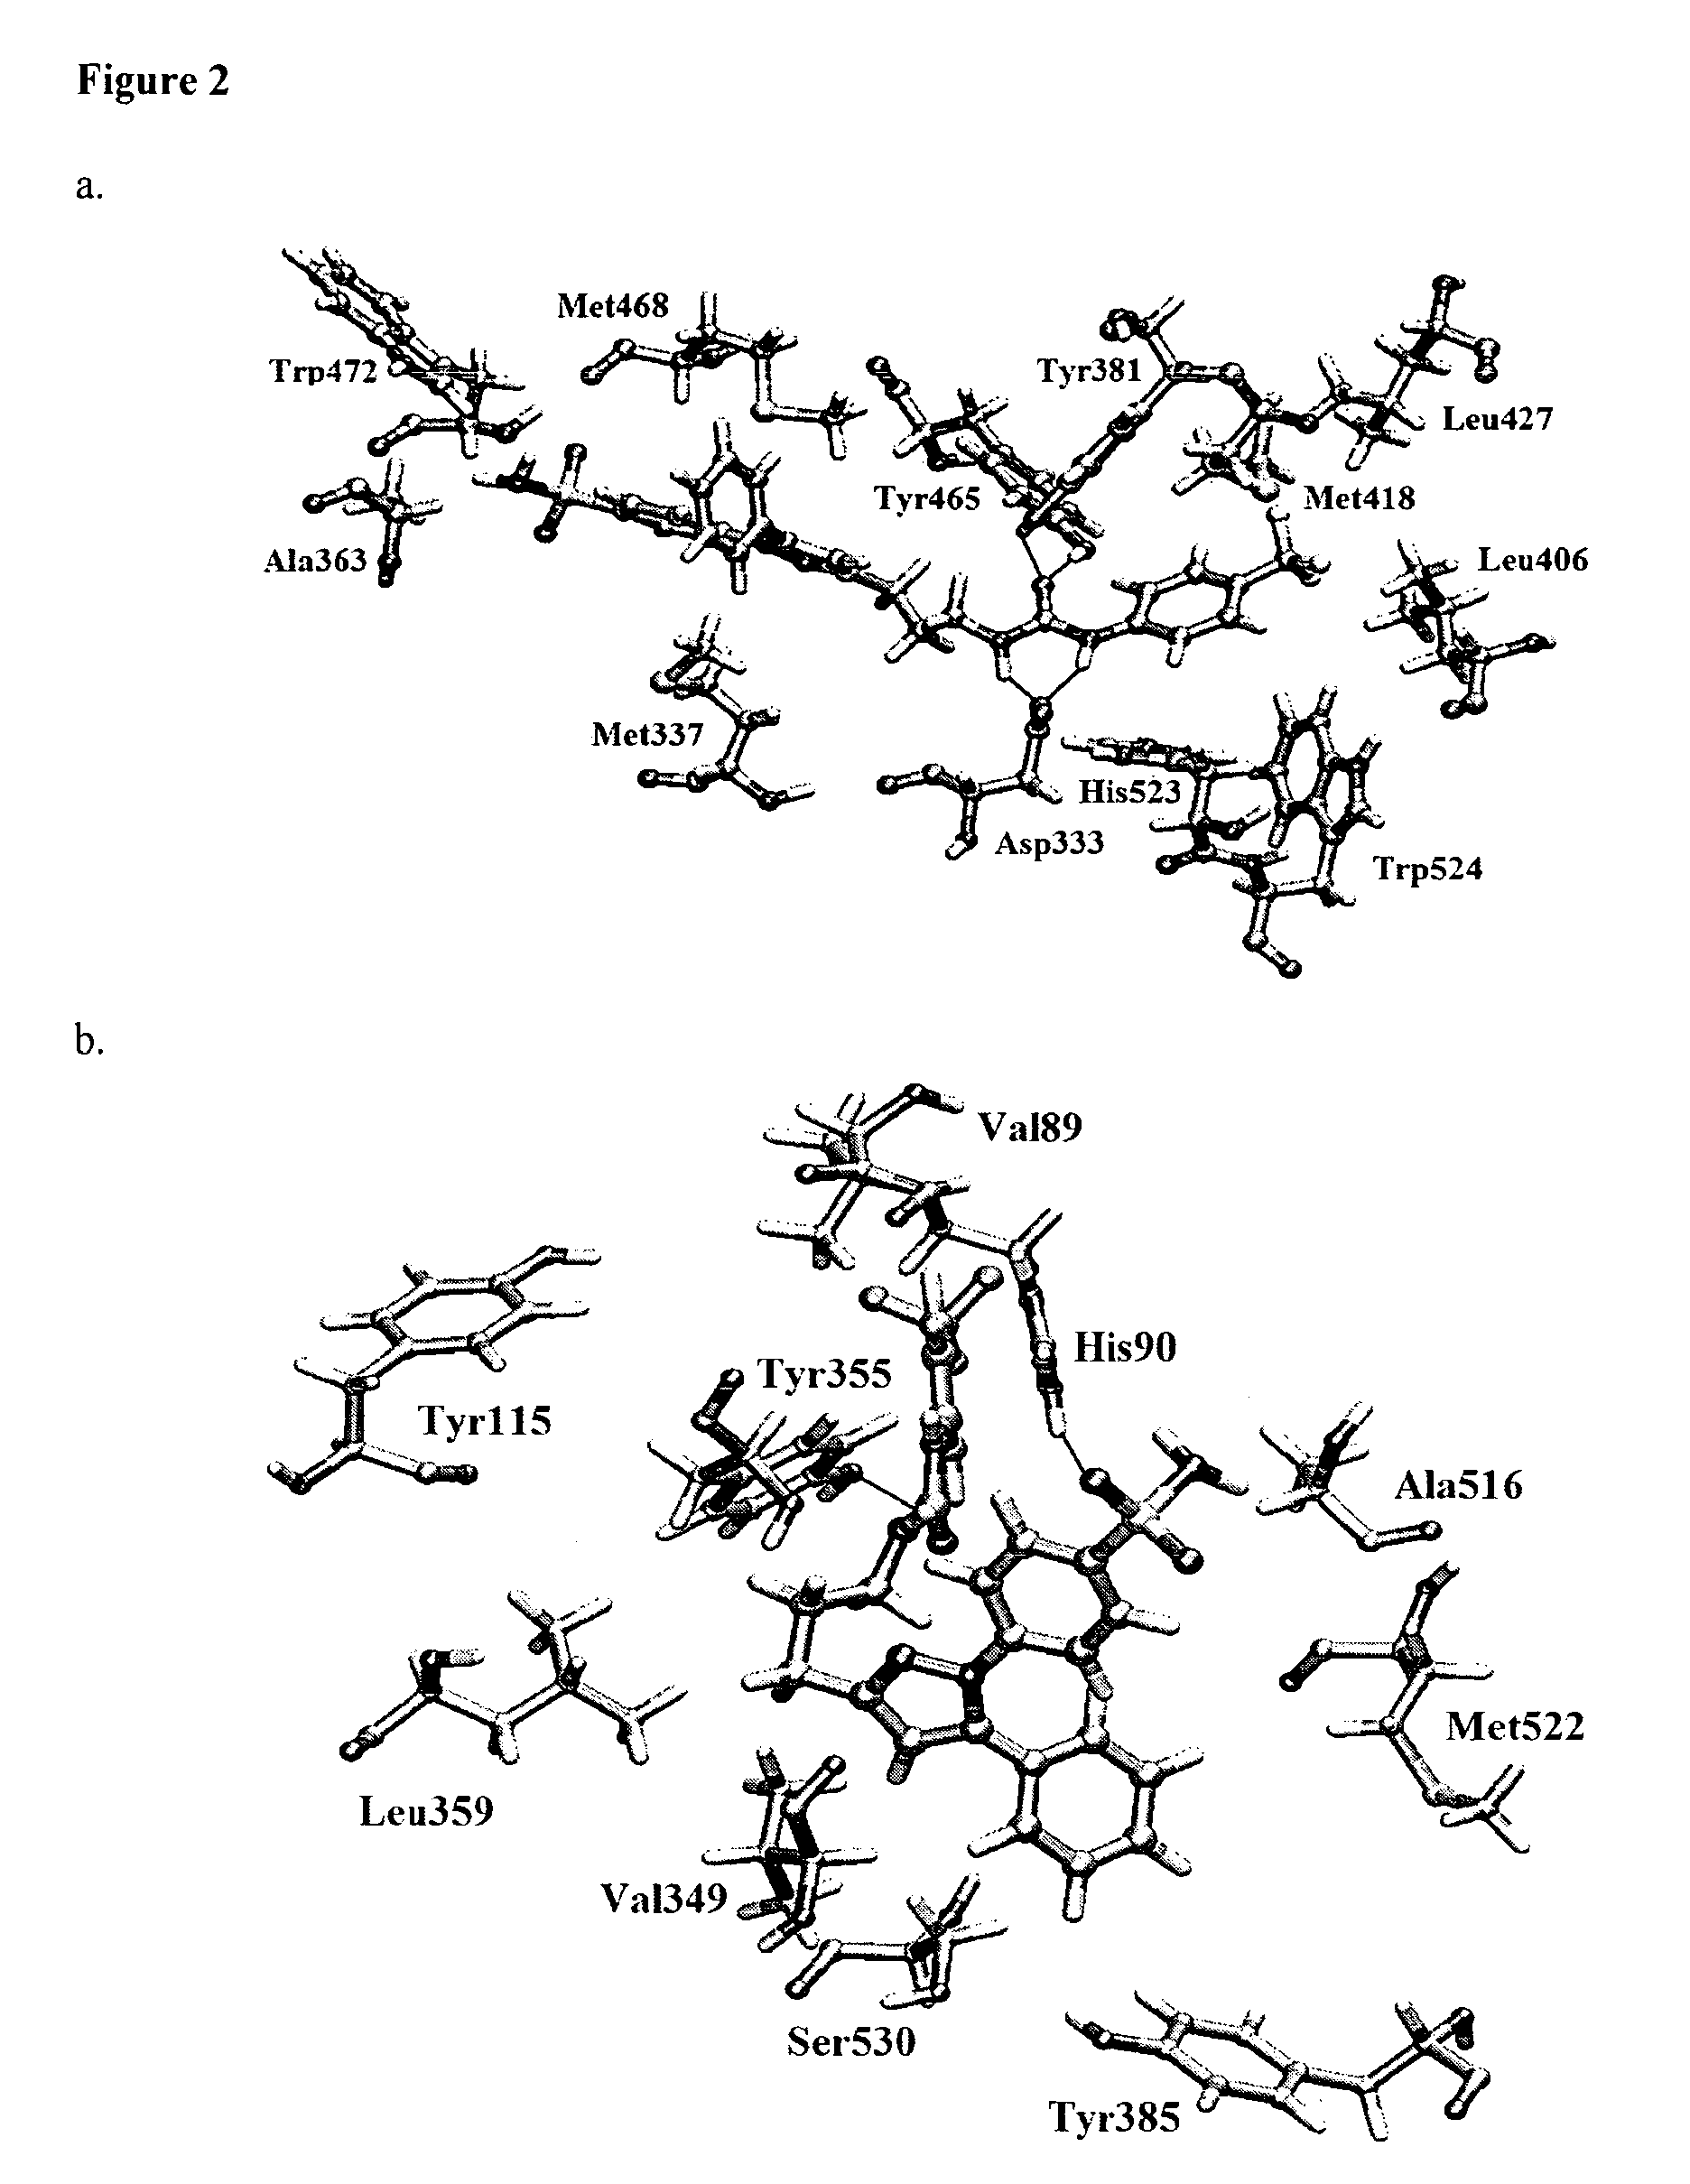 Pyrazole inhibitors of COX-2 and sEH